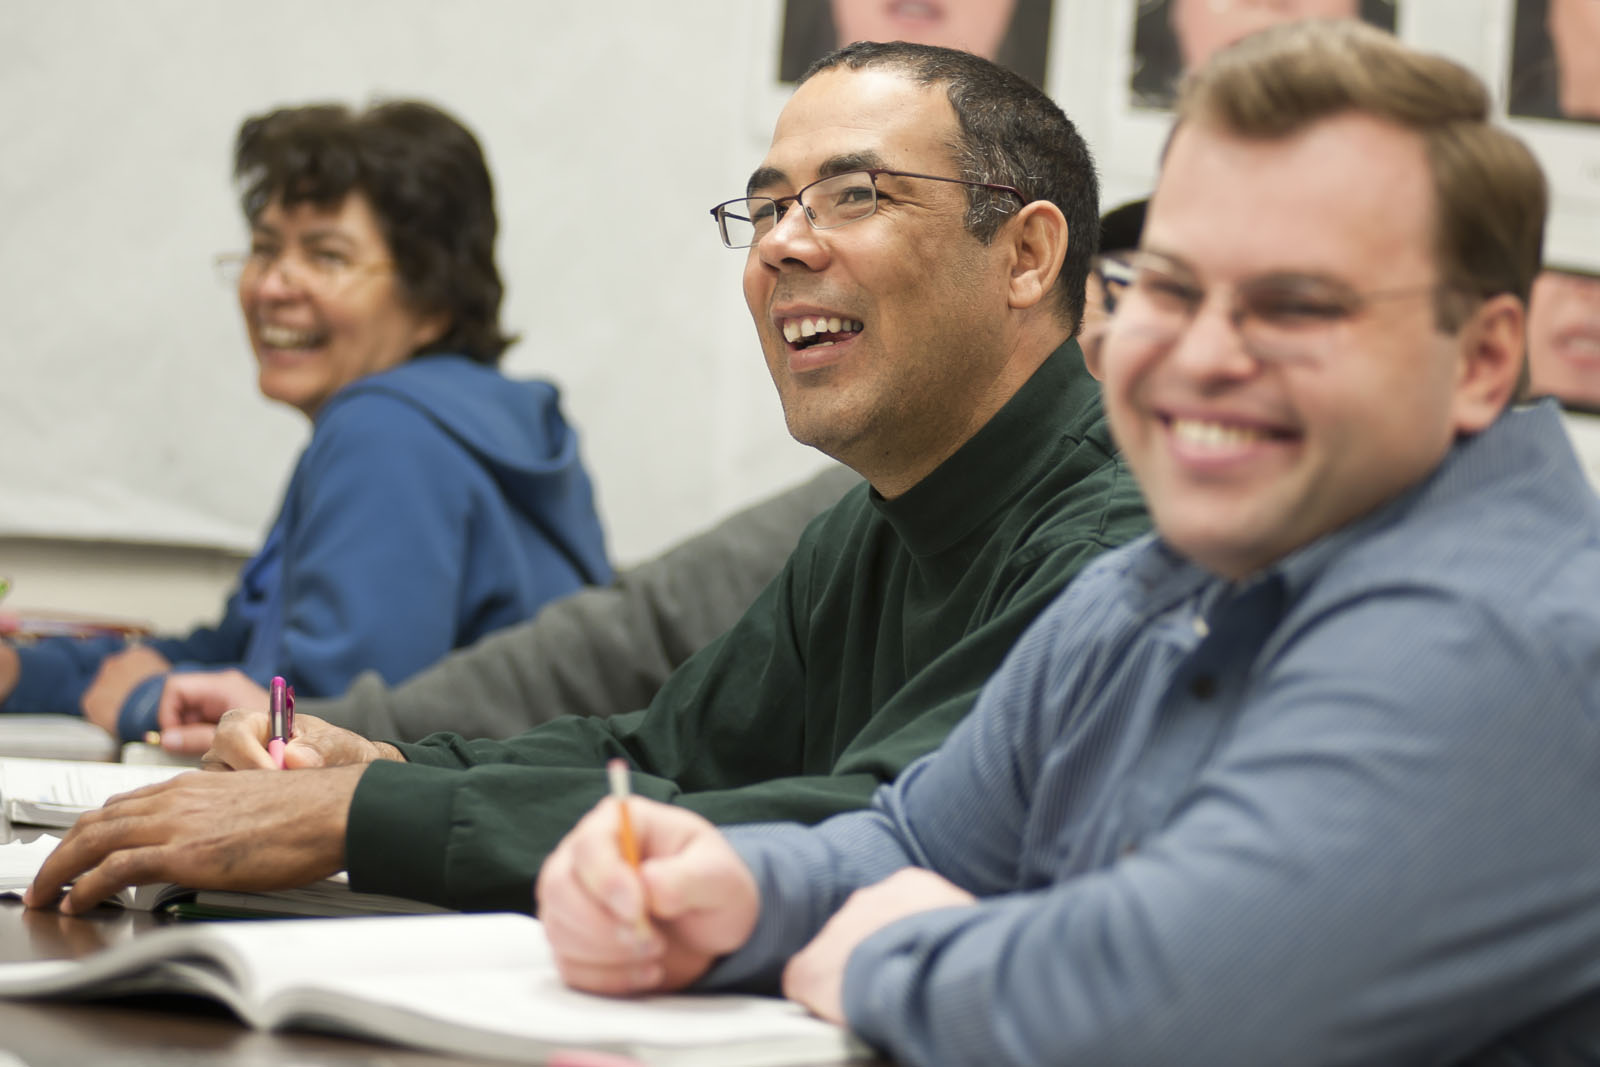 PPSC students laughing during class